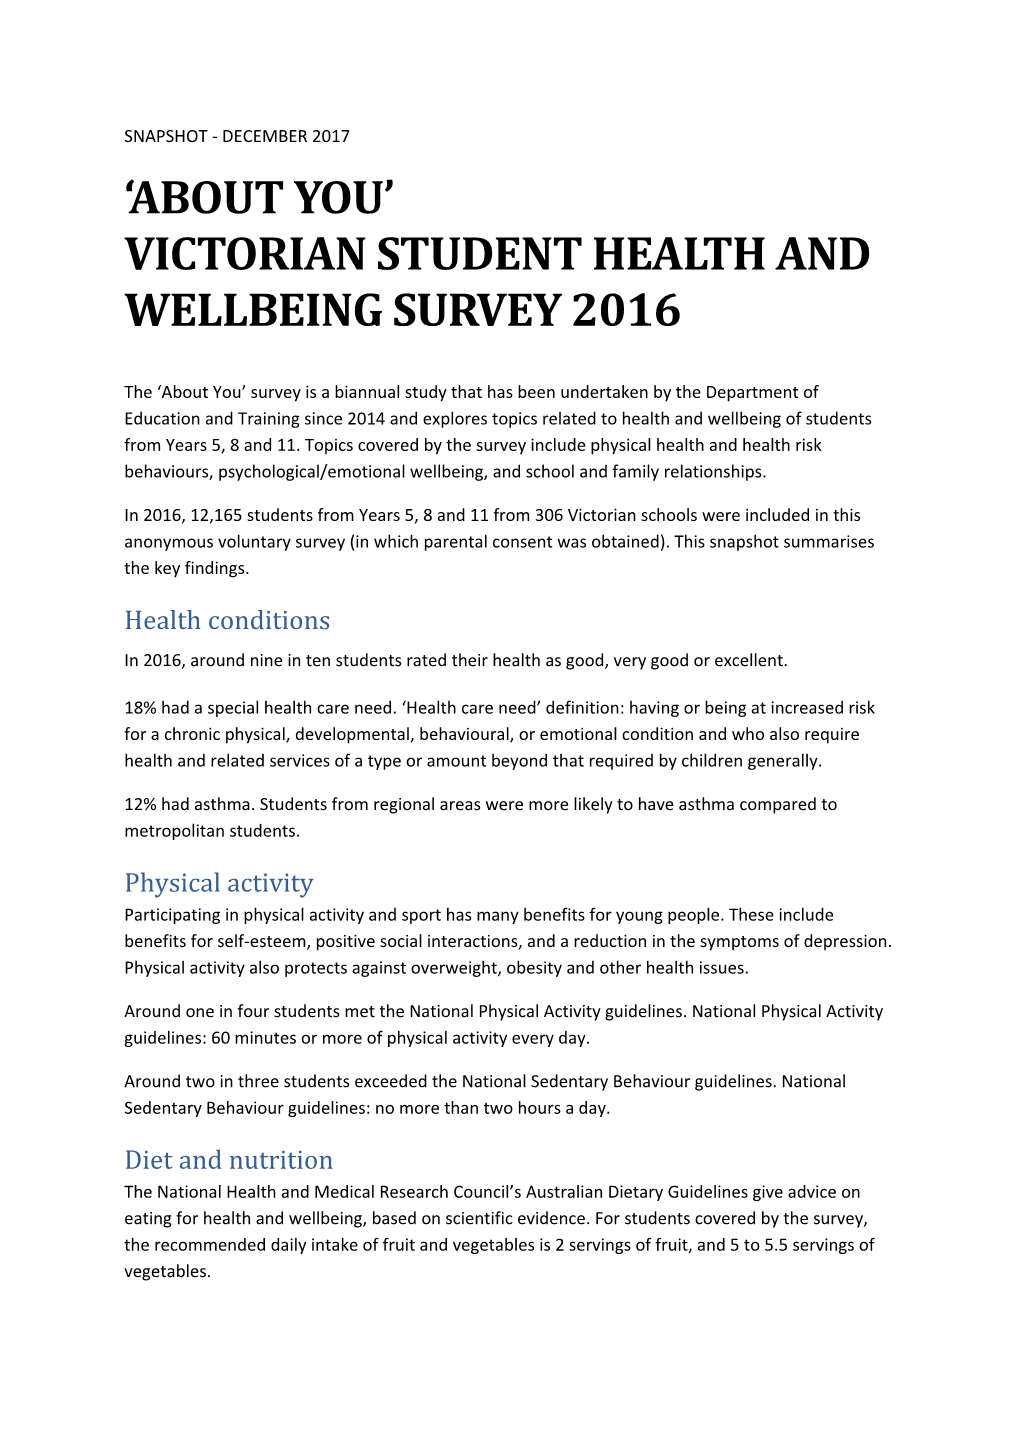 Victorian Student Health and Wellbeing Survey2016